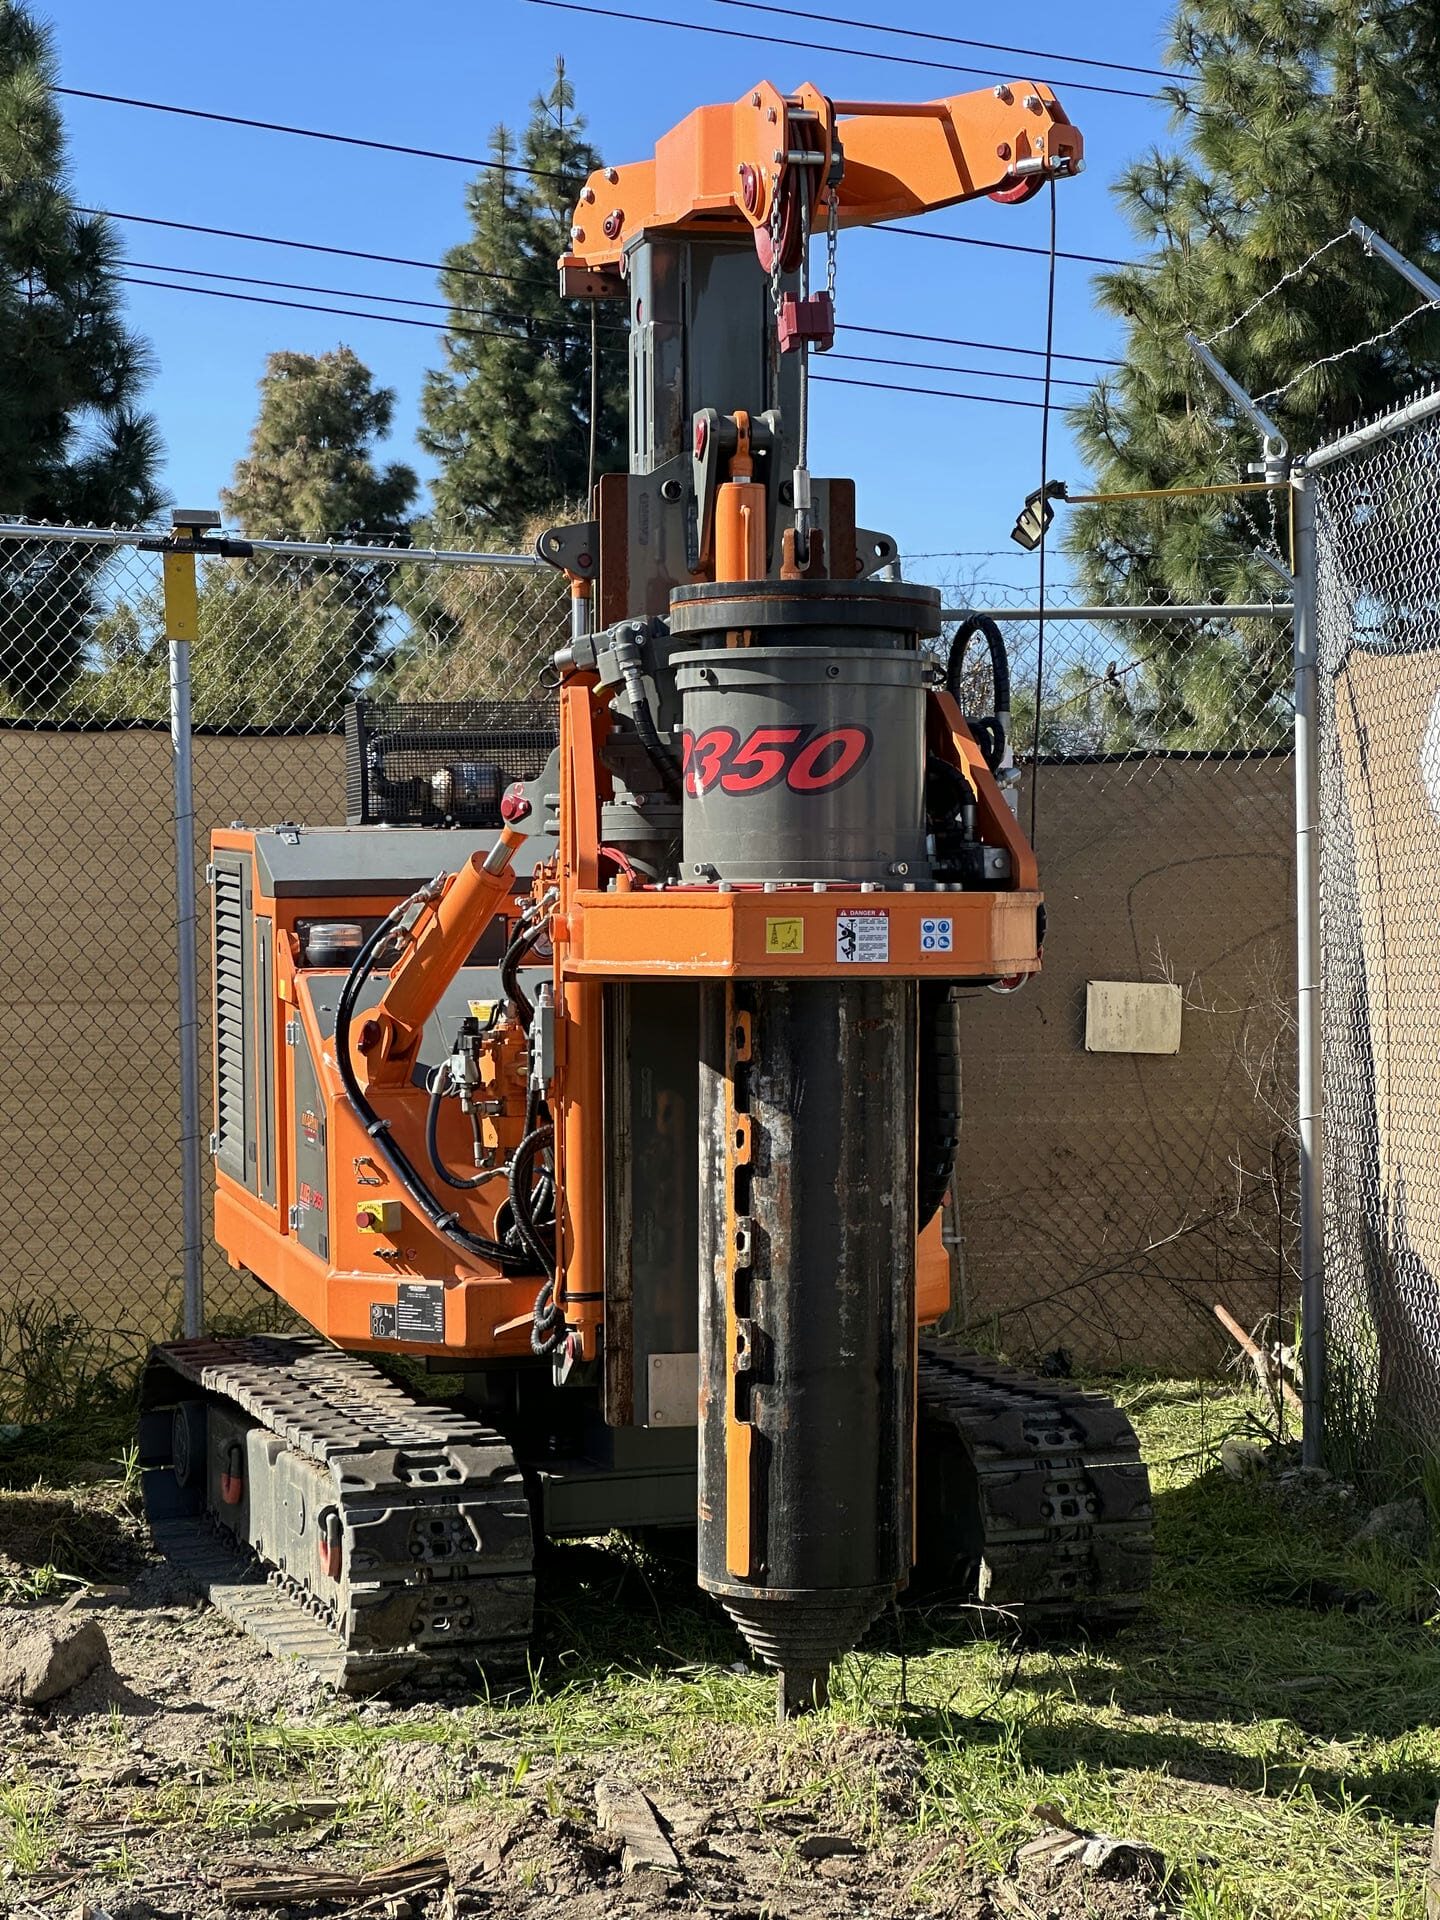 A small orange backhoe machine parked on the ground.